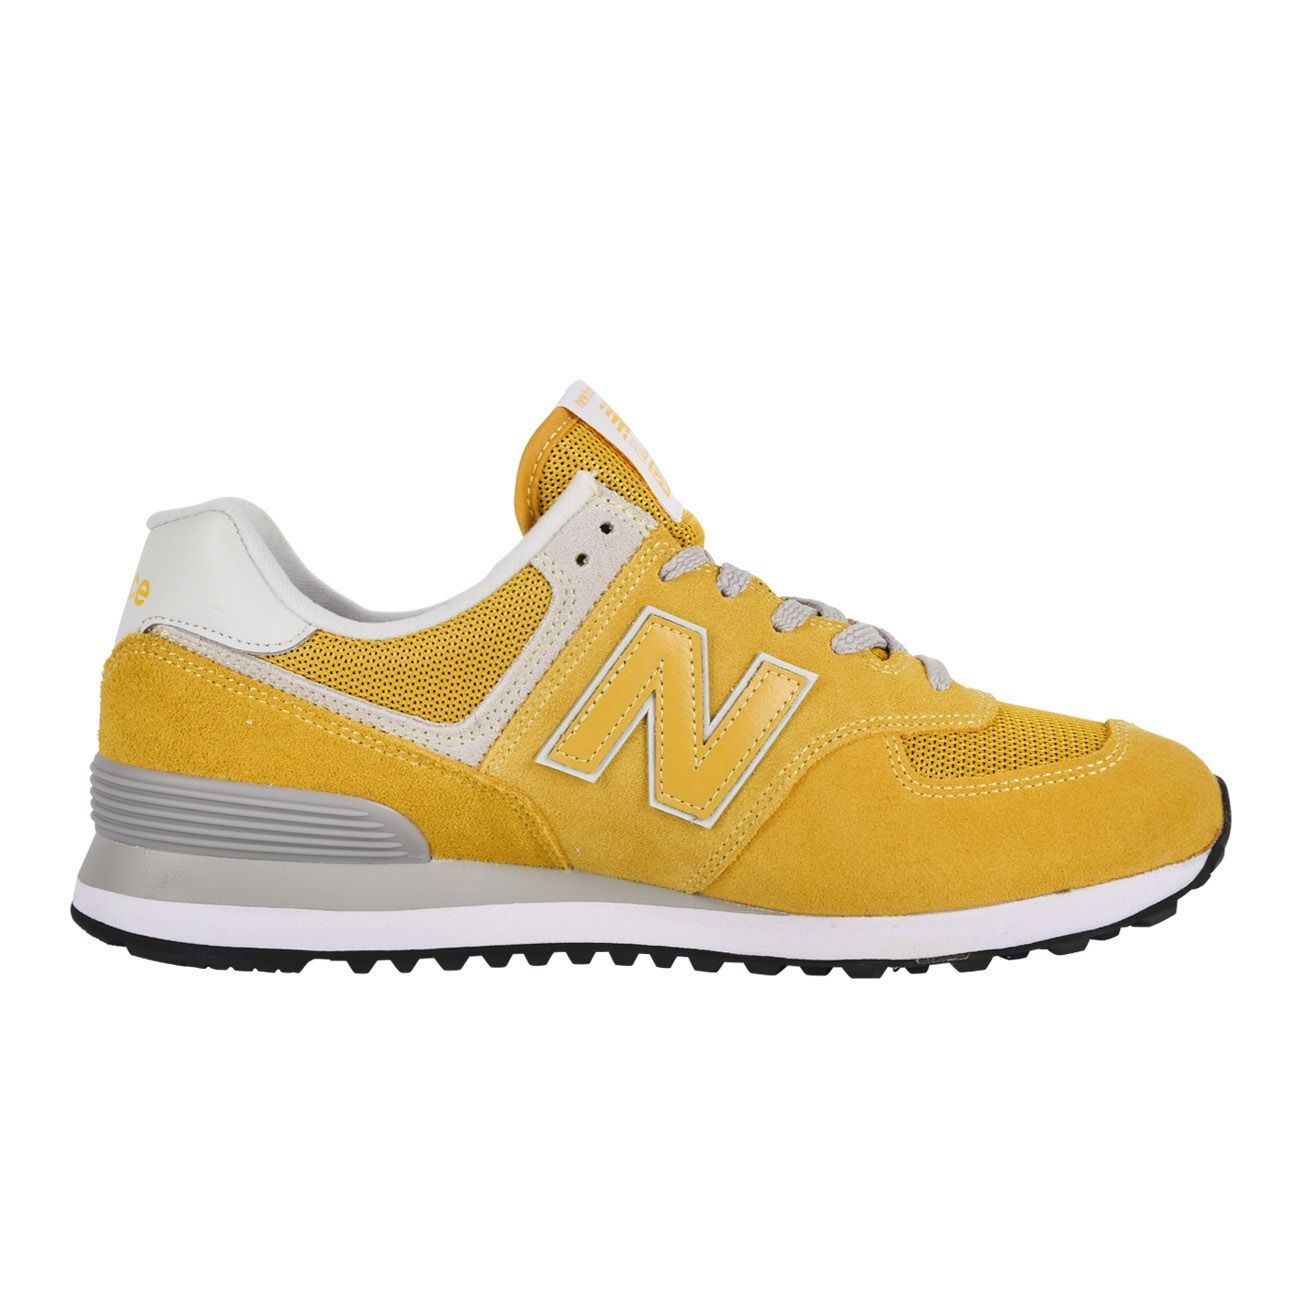 NEW BALANCE SNEAKERS 574 LIFESTYLE SUEDE MESH Uomo Gold yellow ...